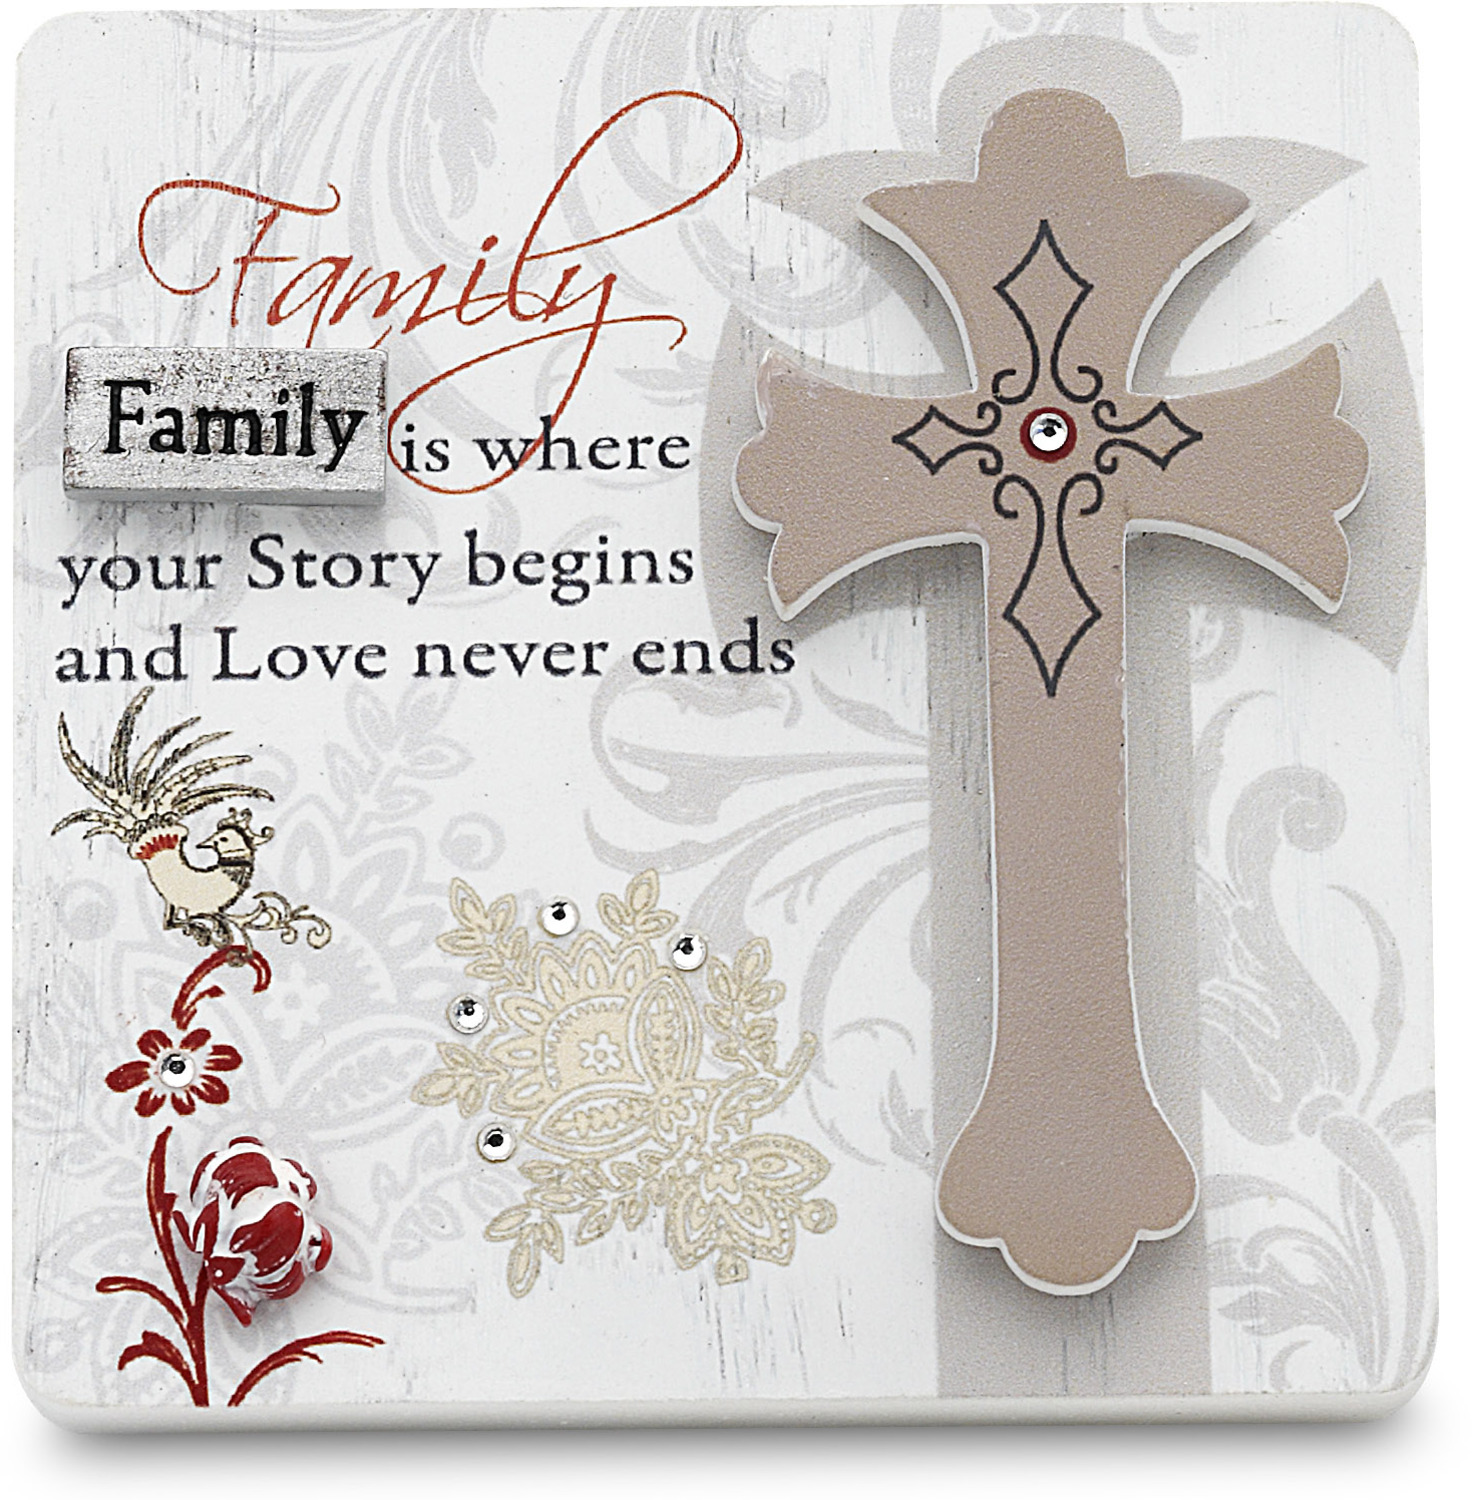 Family by Mark My Words - Family - 3" x 3" Self-Standing Plaque